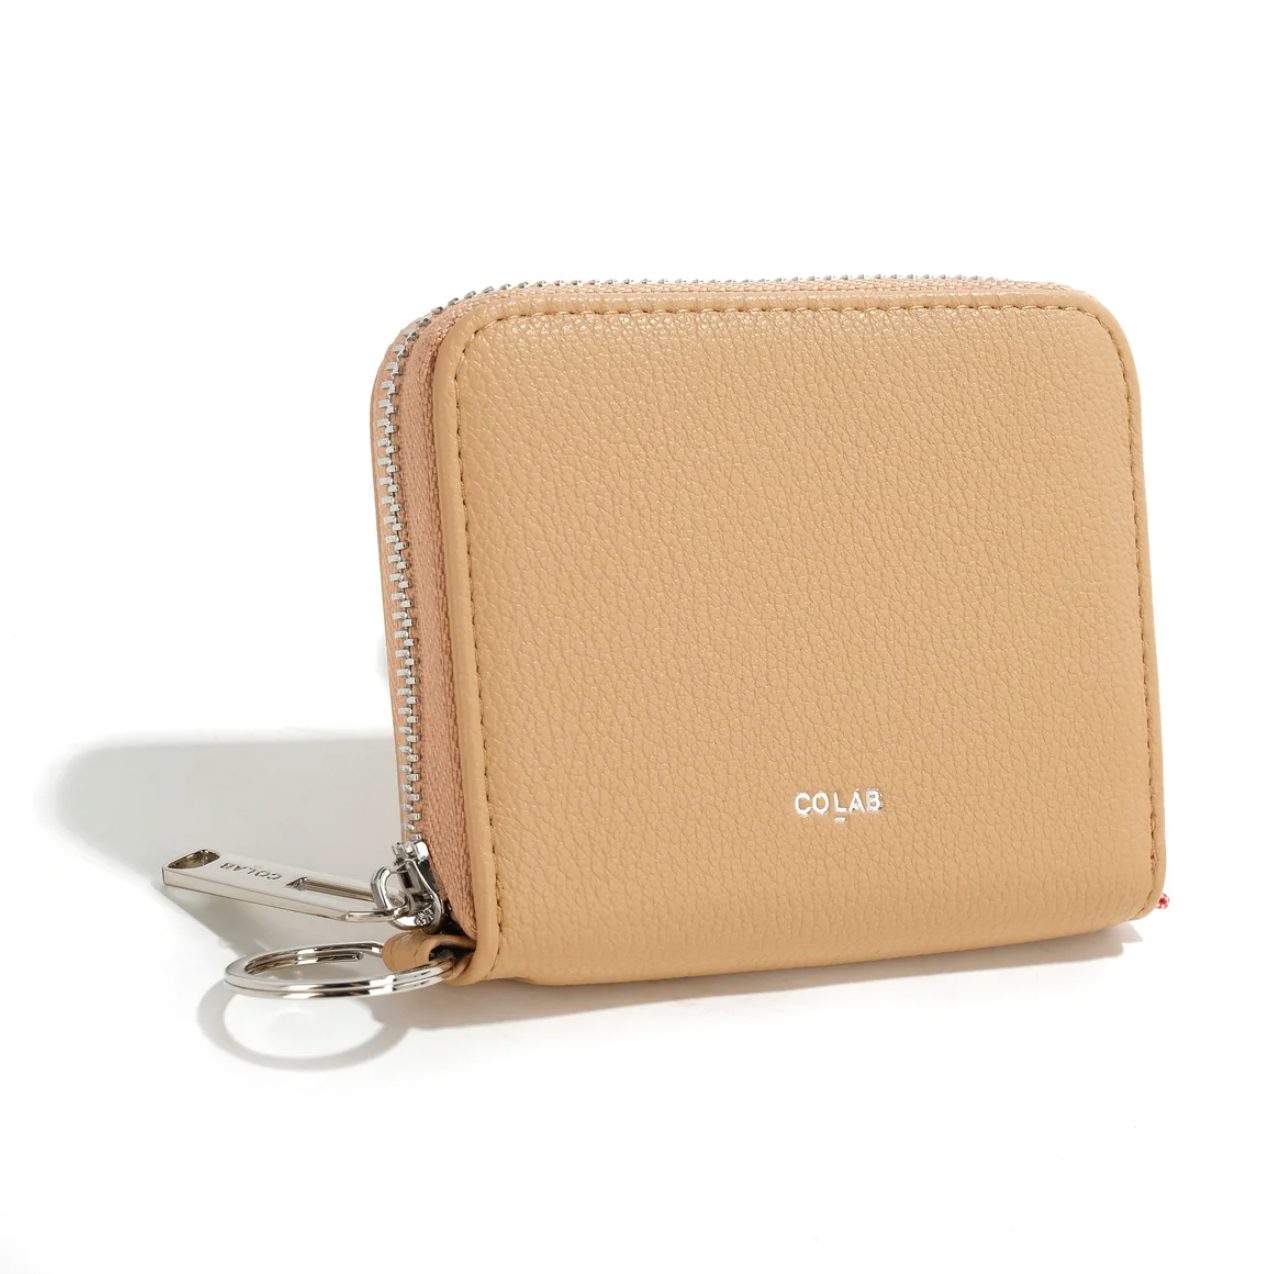 Co-Lab - Small Wallet with Keyring in Beach